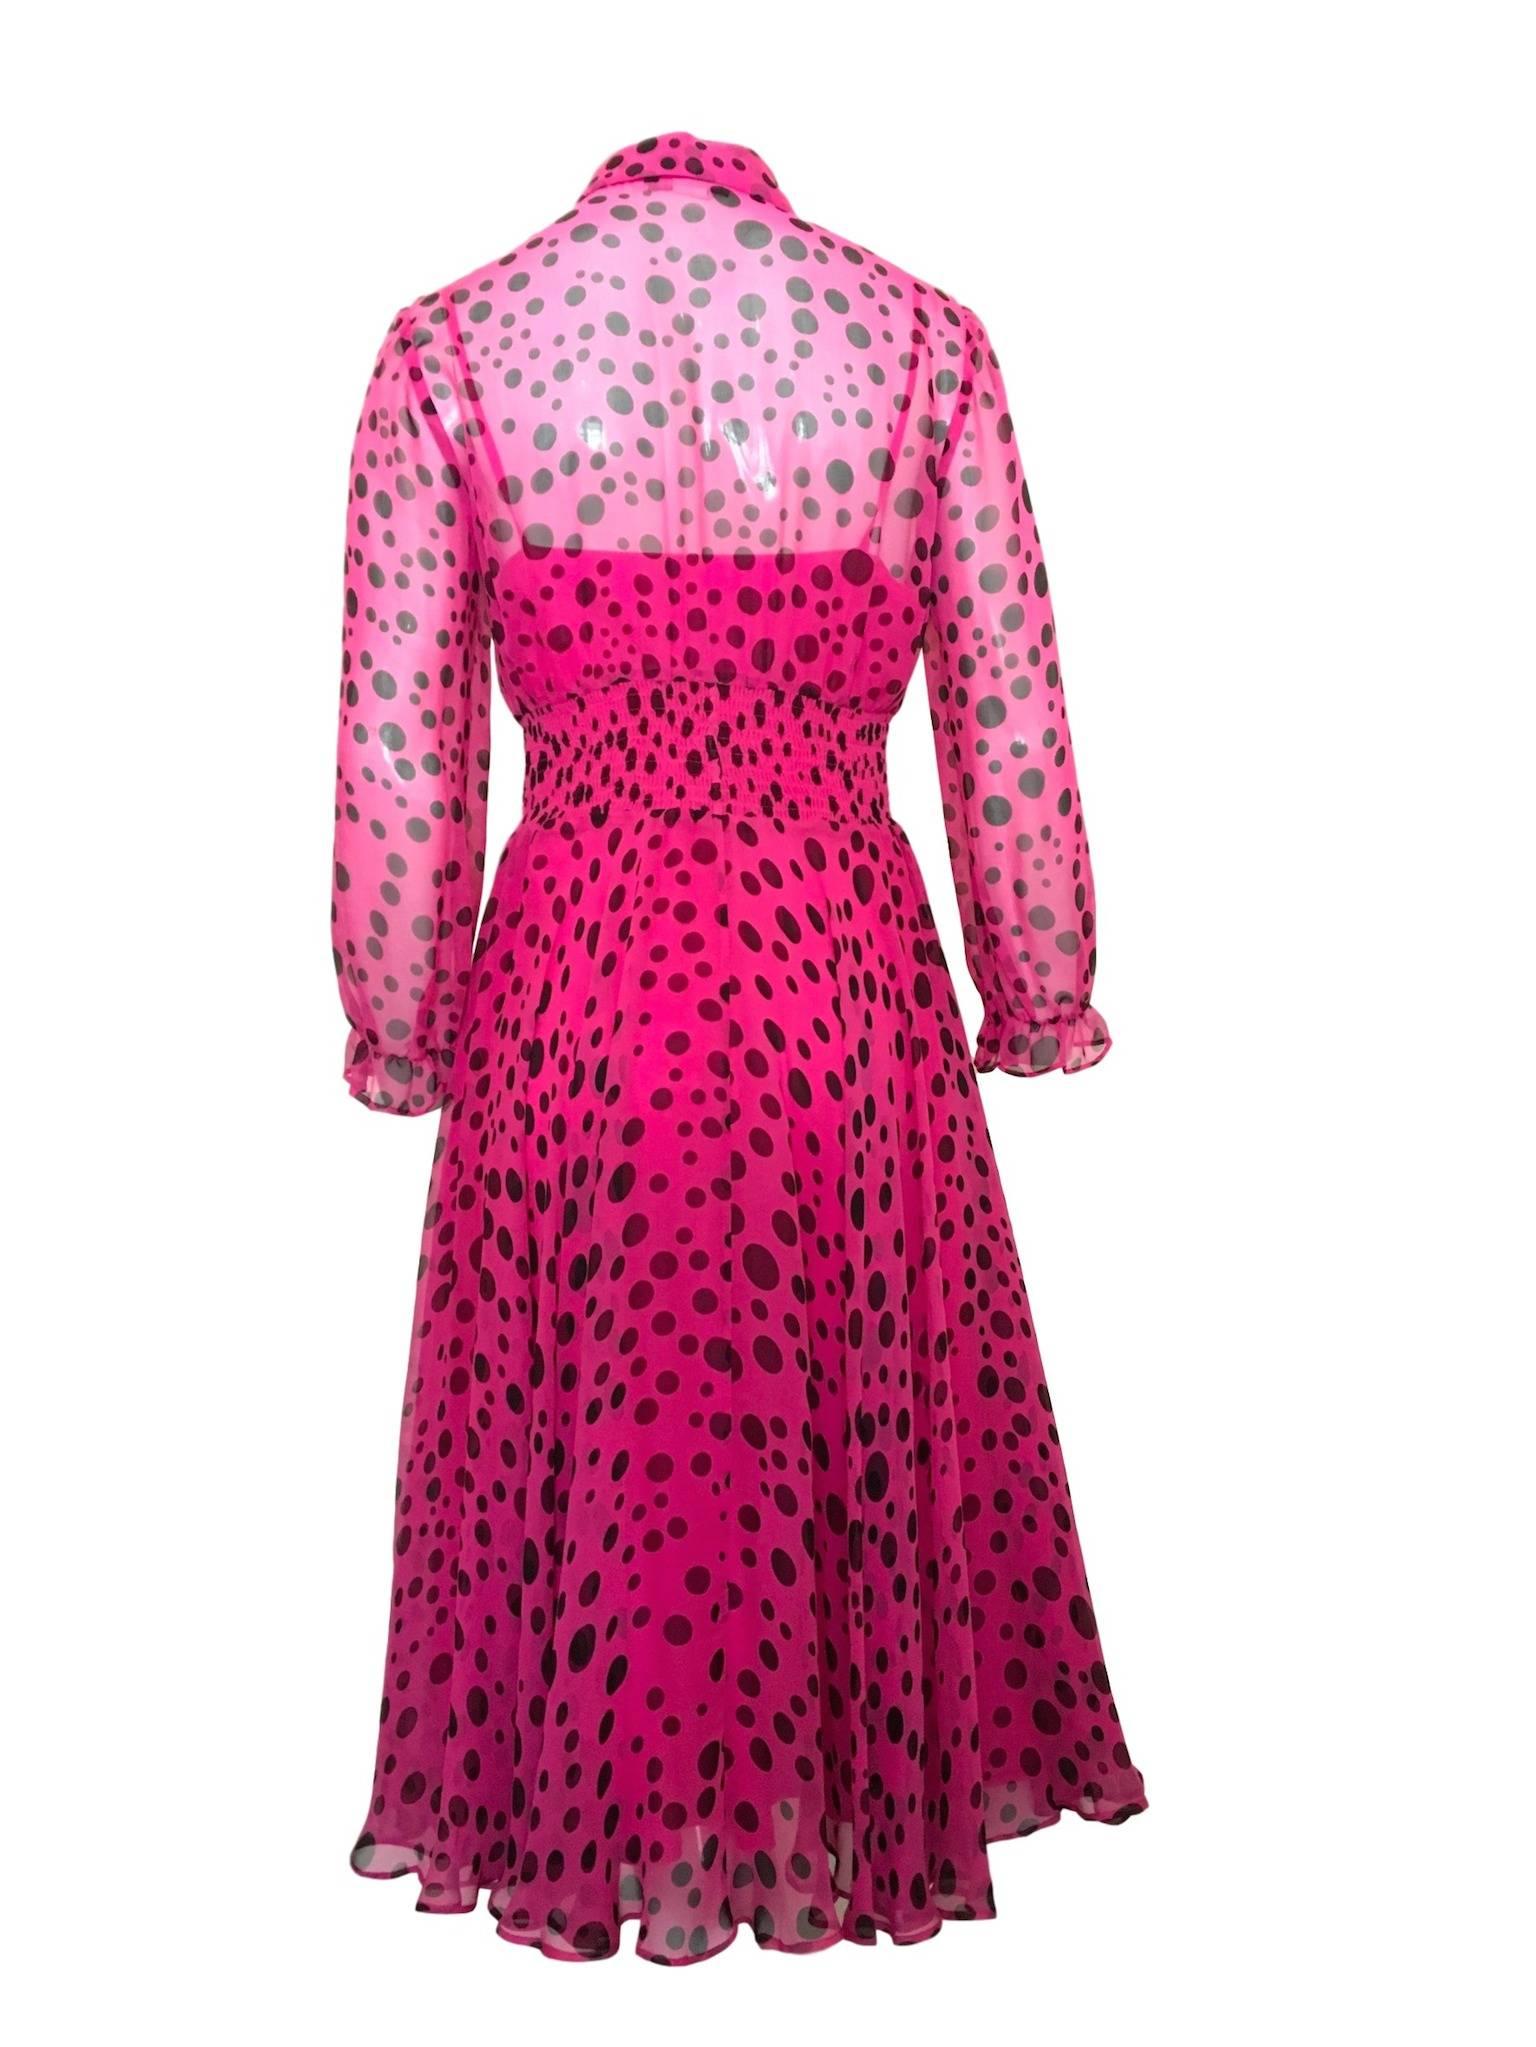 After Six 1970s pink and black polka dot silk dress. Long sleeve button front midi length dress with elasticated waist line. Has its own inner slip.

In excellent condition, a few very minor snags 

Size UK 10/12, Measures 19 inches across bust,